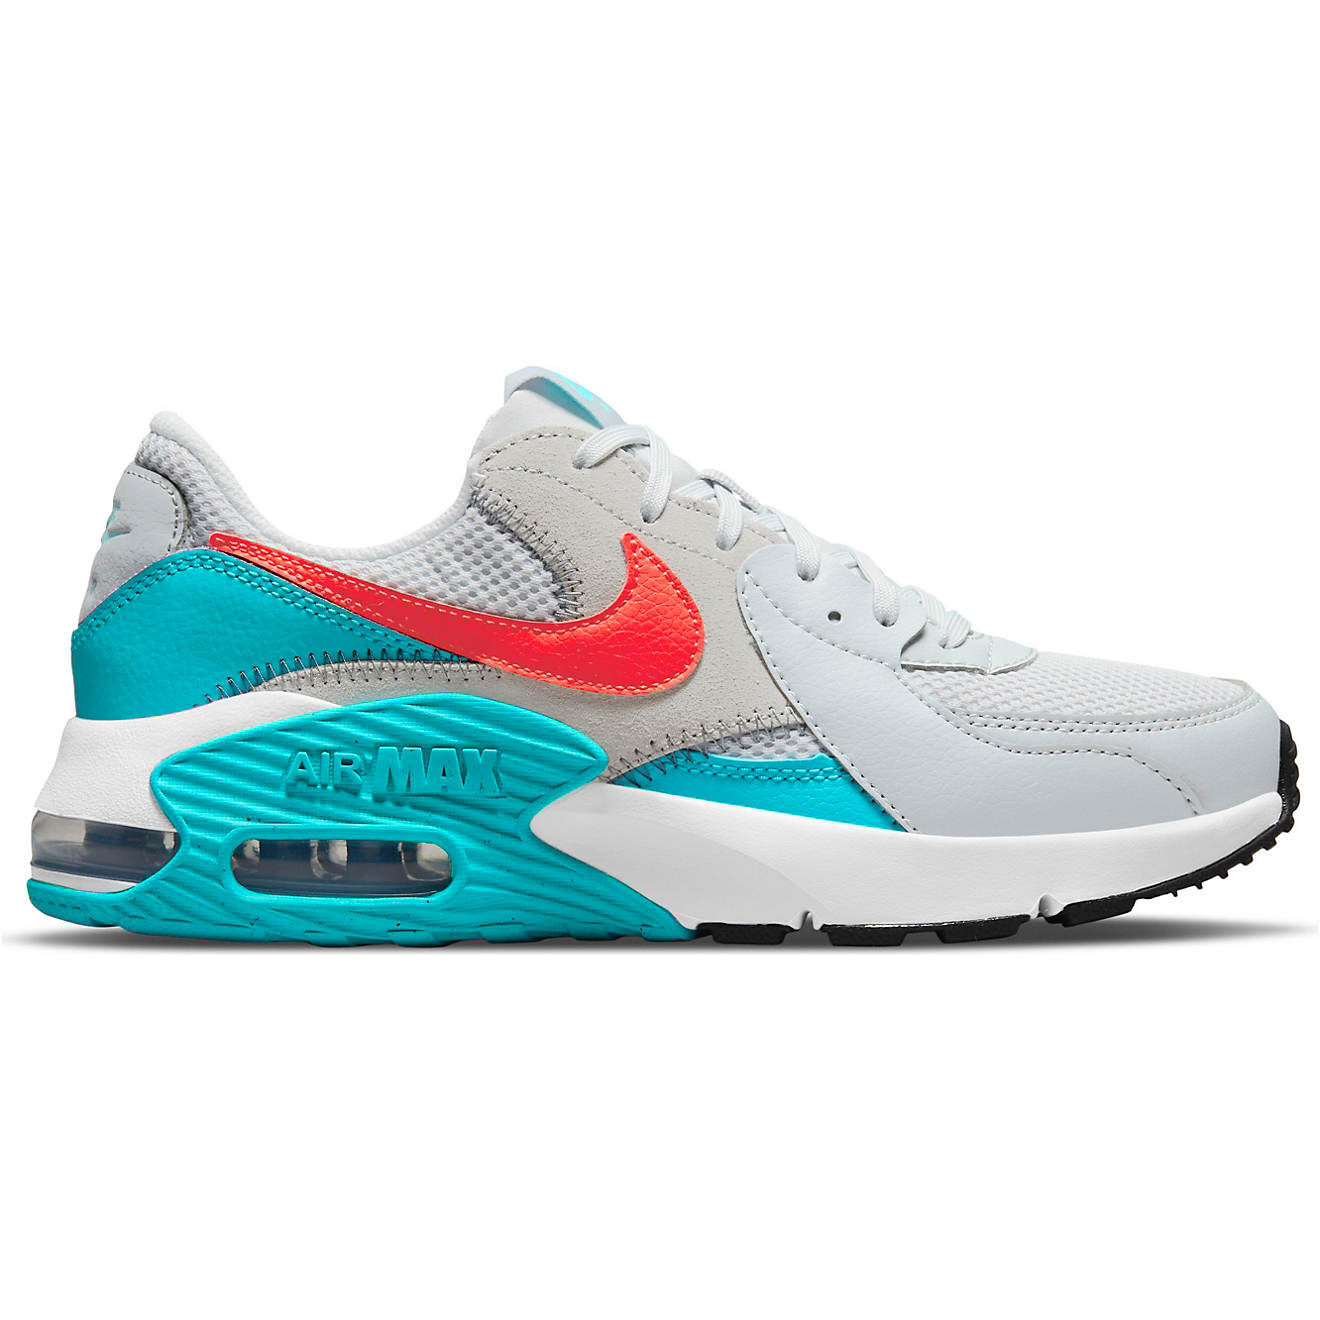 Nike Women's Air Max Excee Shoes on Sale At Academy Sports + Outdoors